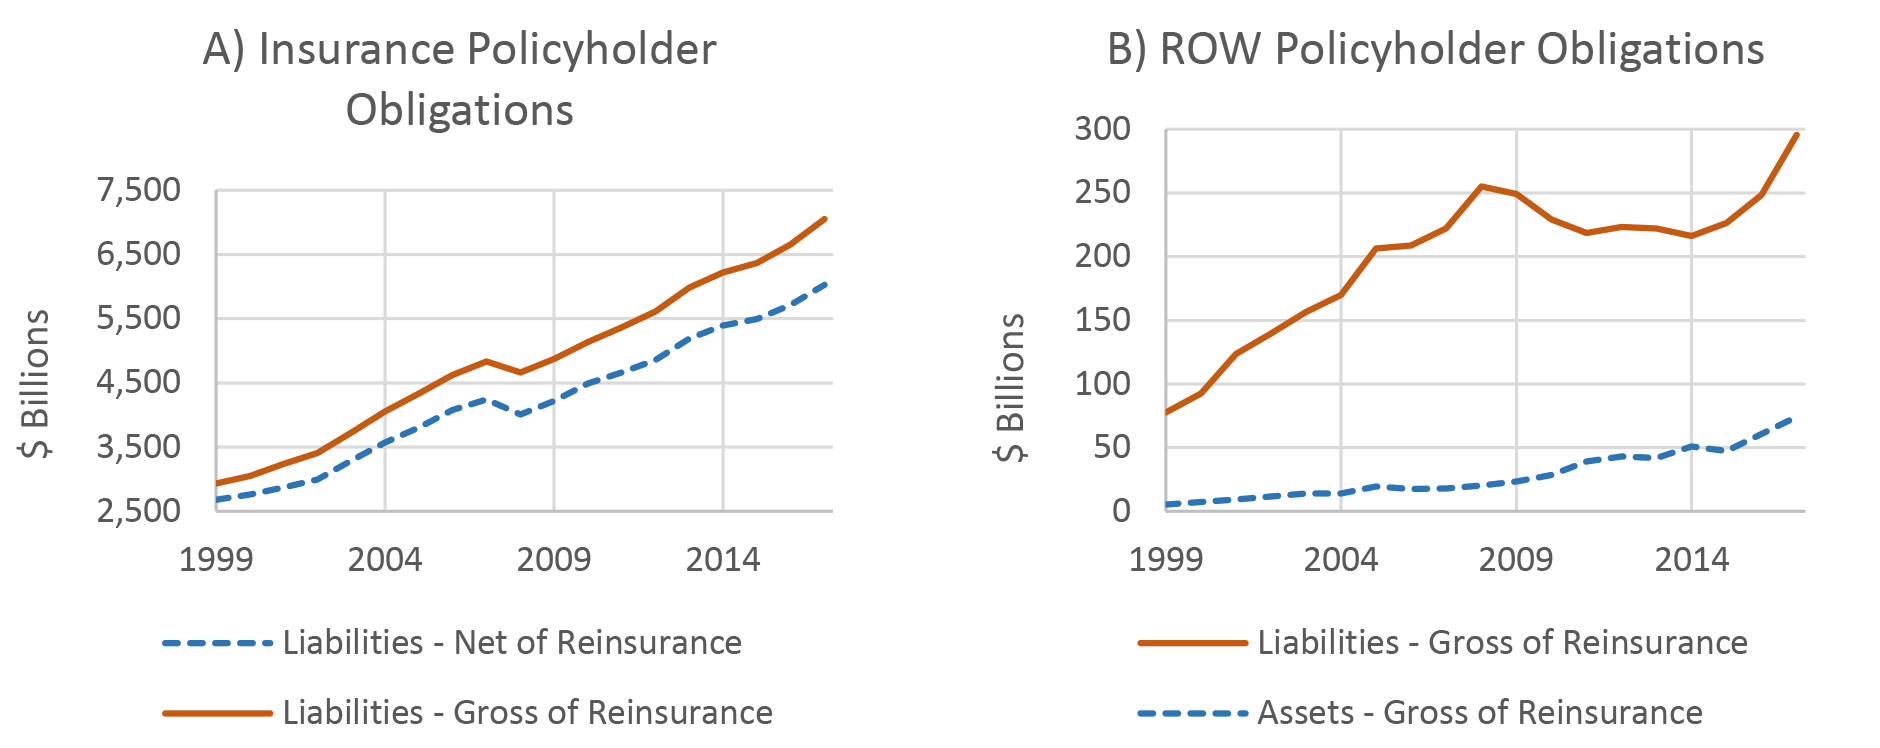 Figure 4. Changes in Policyholder Obligations due to Reinsurance for the Insurance and ROW Sectors. See accessible link for data description.